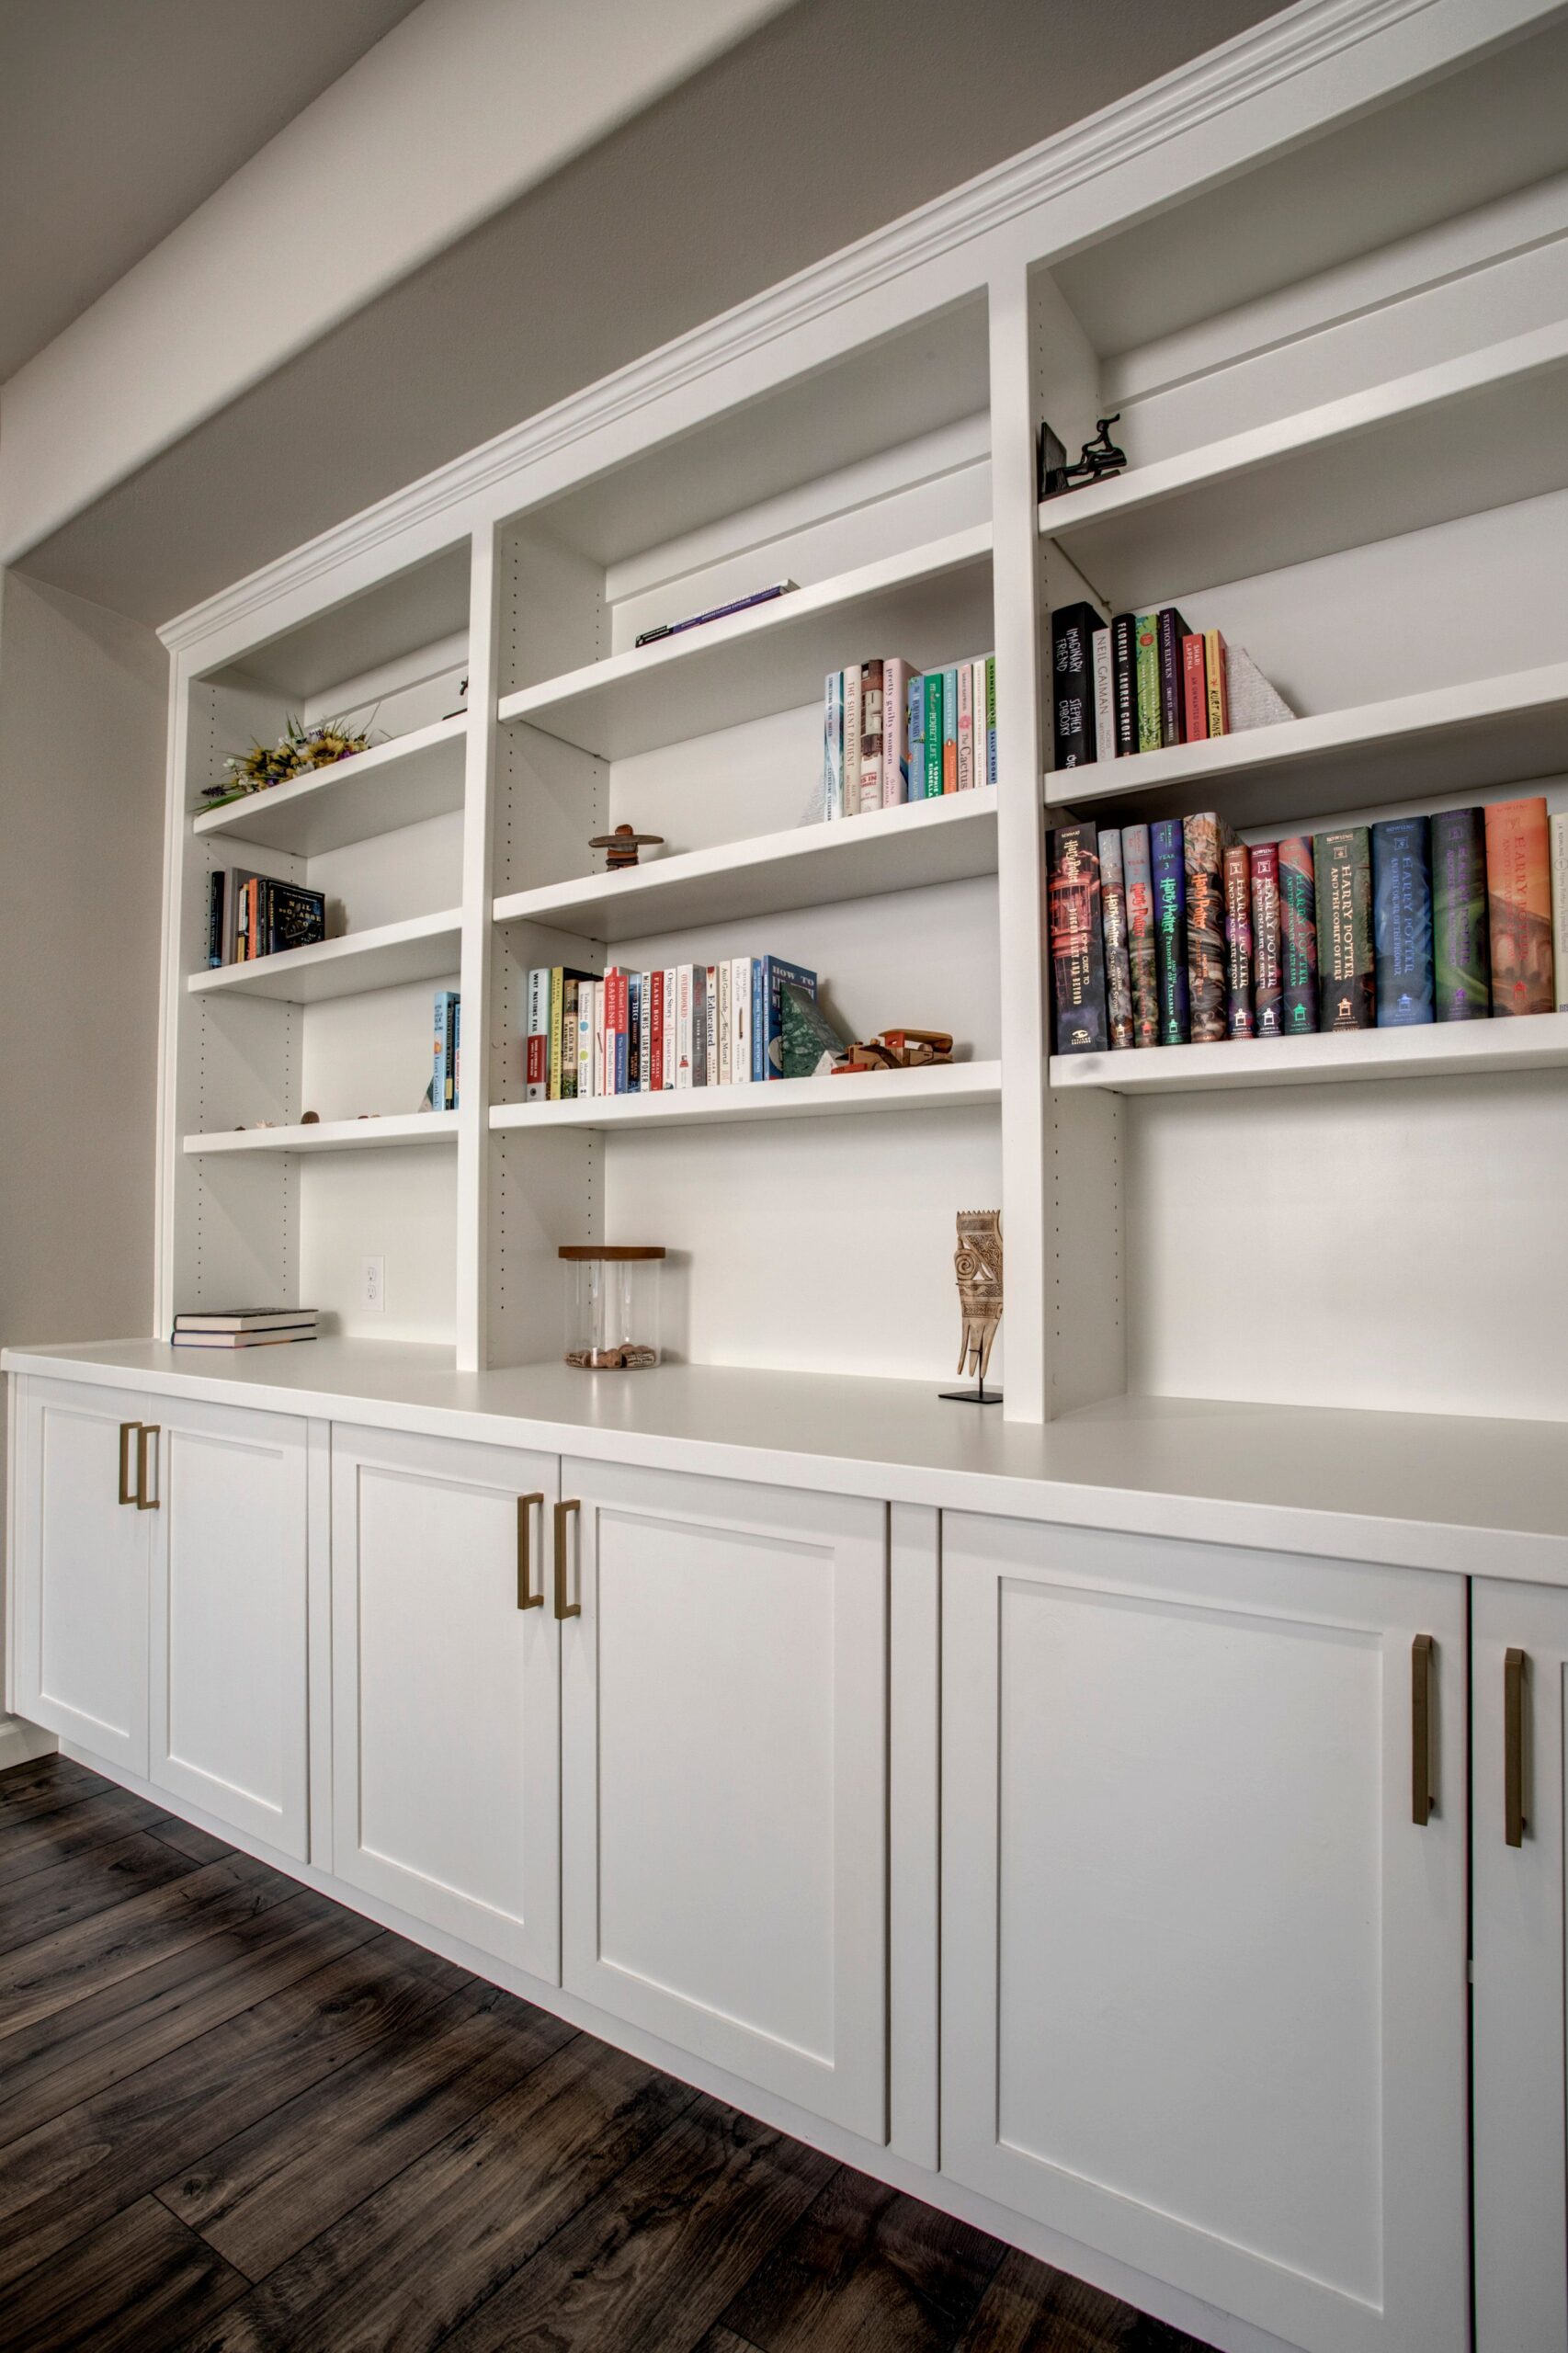 Built-In Painted Bookcase - Shelves